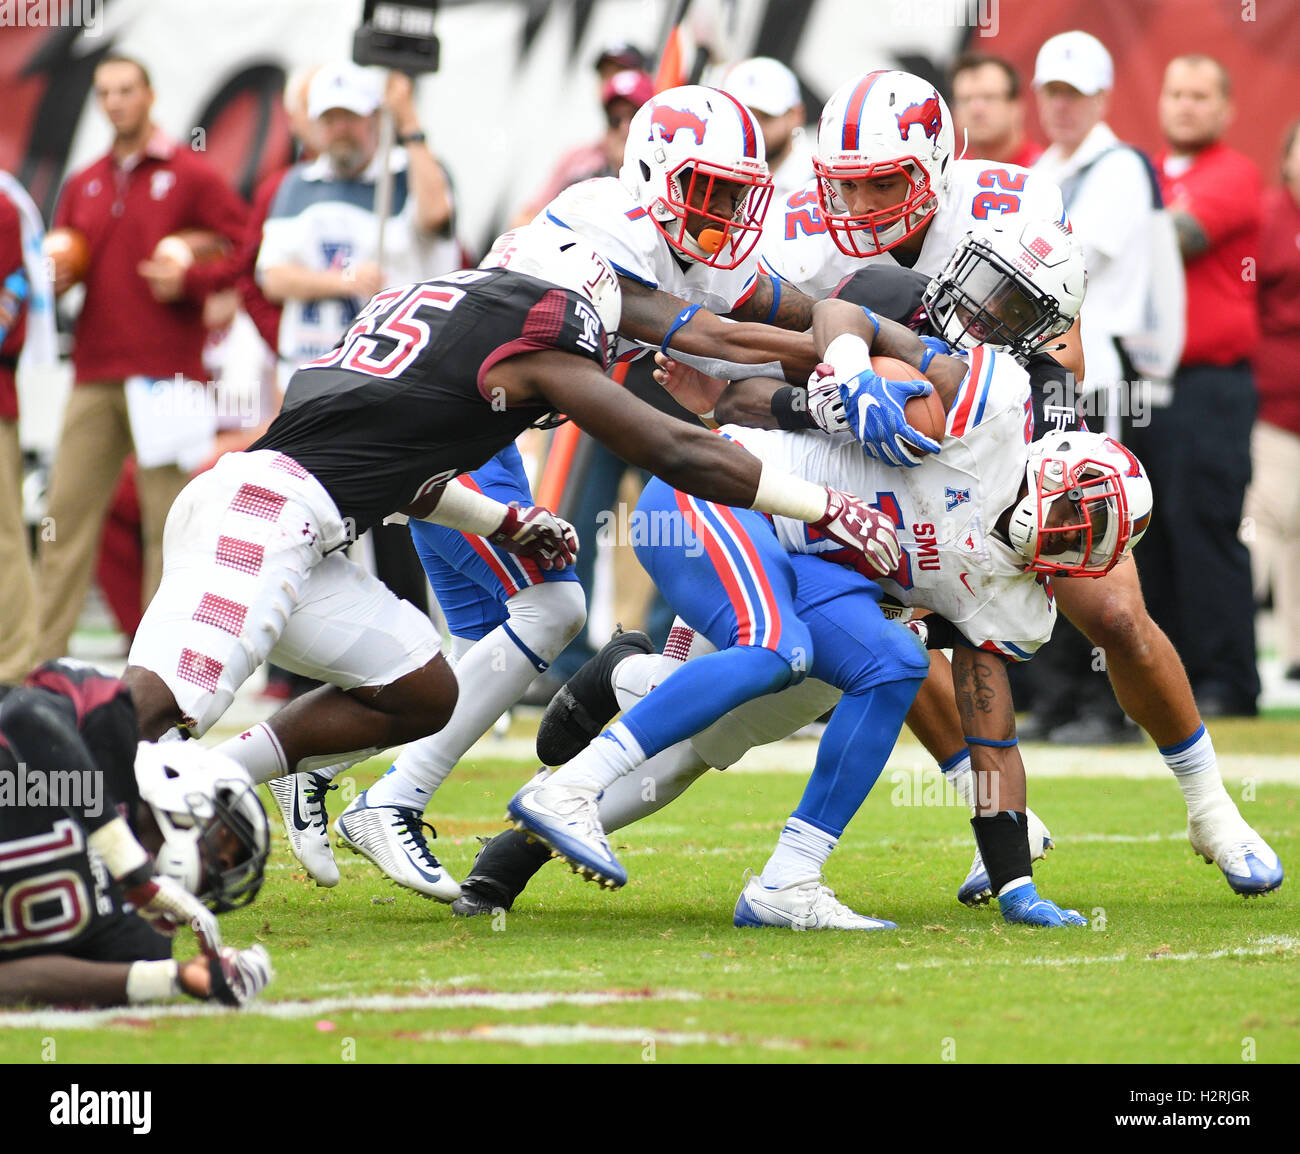 Philadelphia, Pennsylvania, USA. 1st Oct, 2016. Temple and SMU in action during the football game played at Lincoln Financial Field in Philadelphia Credit:  Ricky Fitchett/ZUMA Wire/Alamy Live News Stock Photo